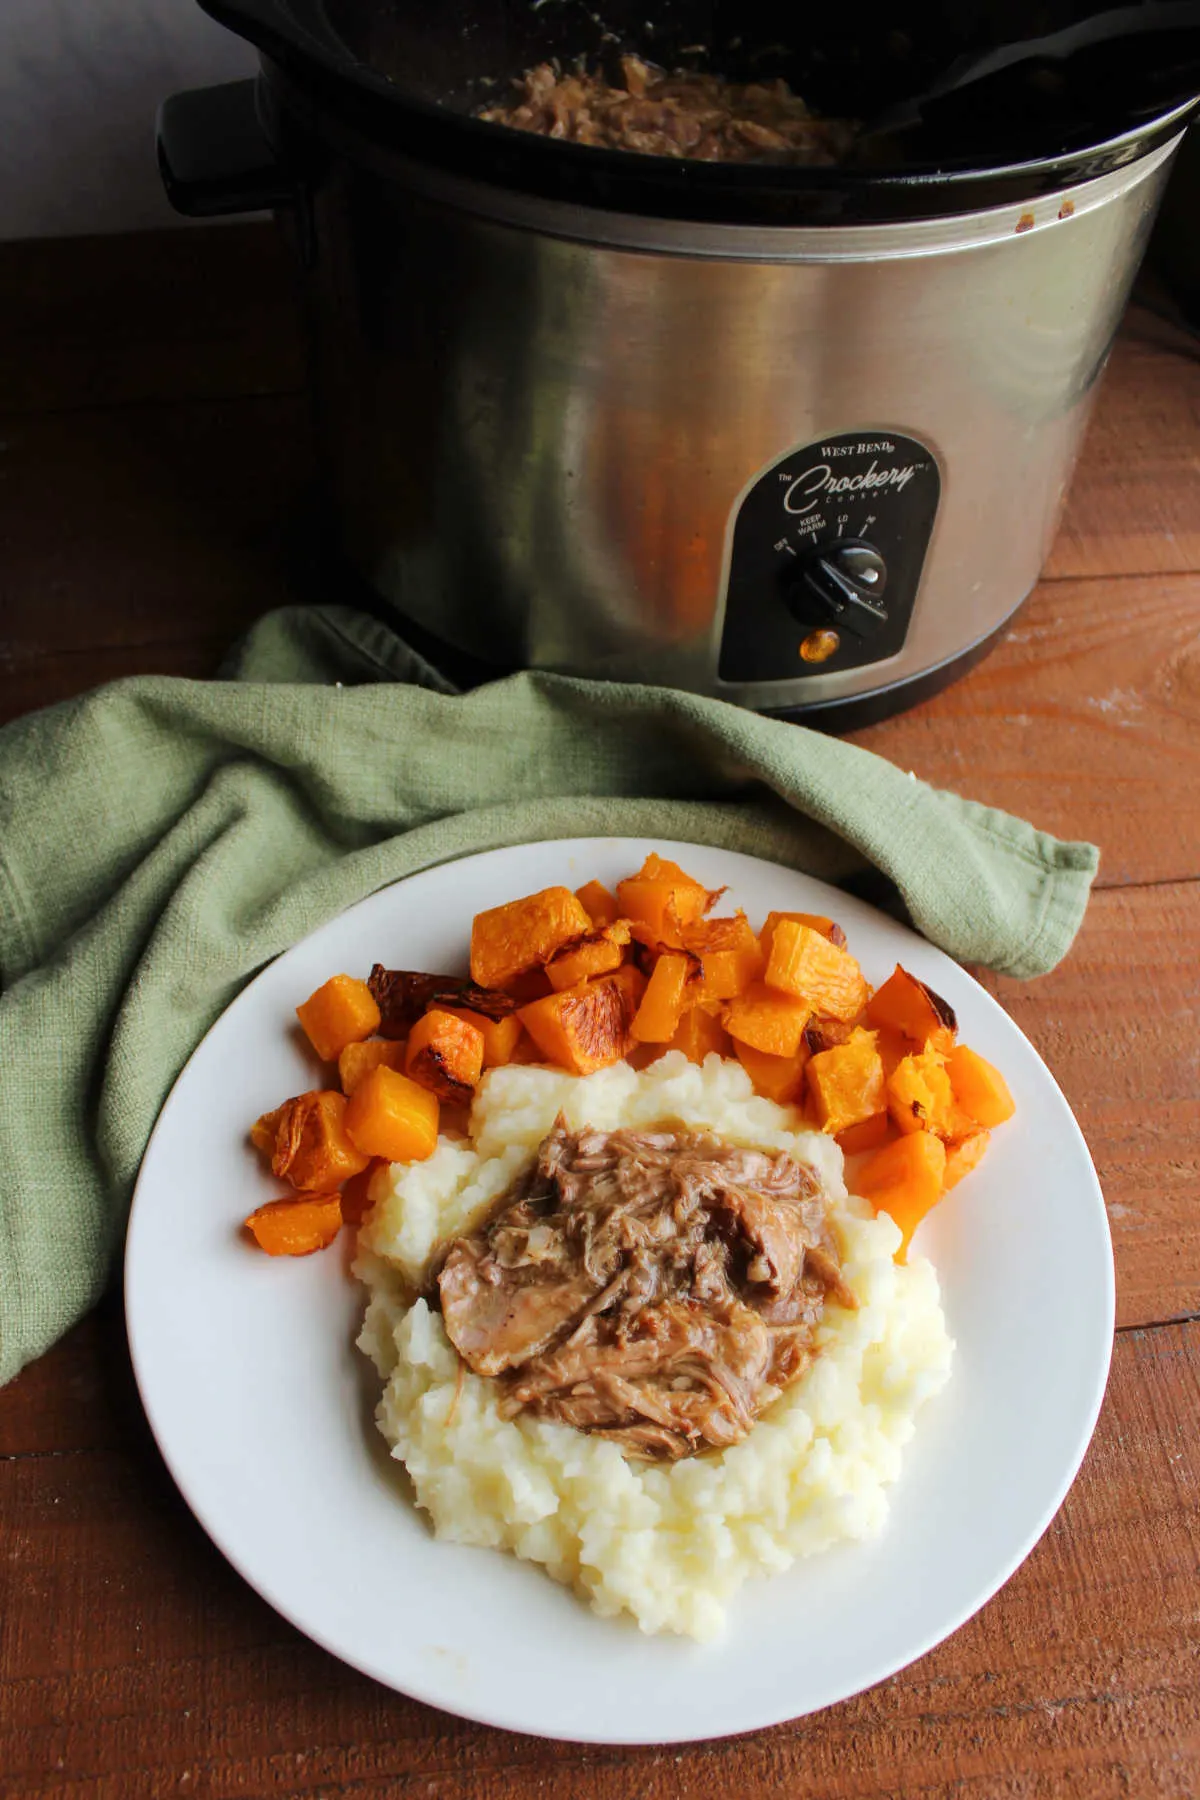 Dinner plate with apple cider pulled pork on potatoes with butternut squash next to crockpot with remaining pork mixture inside.